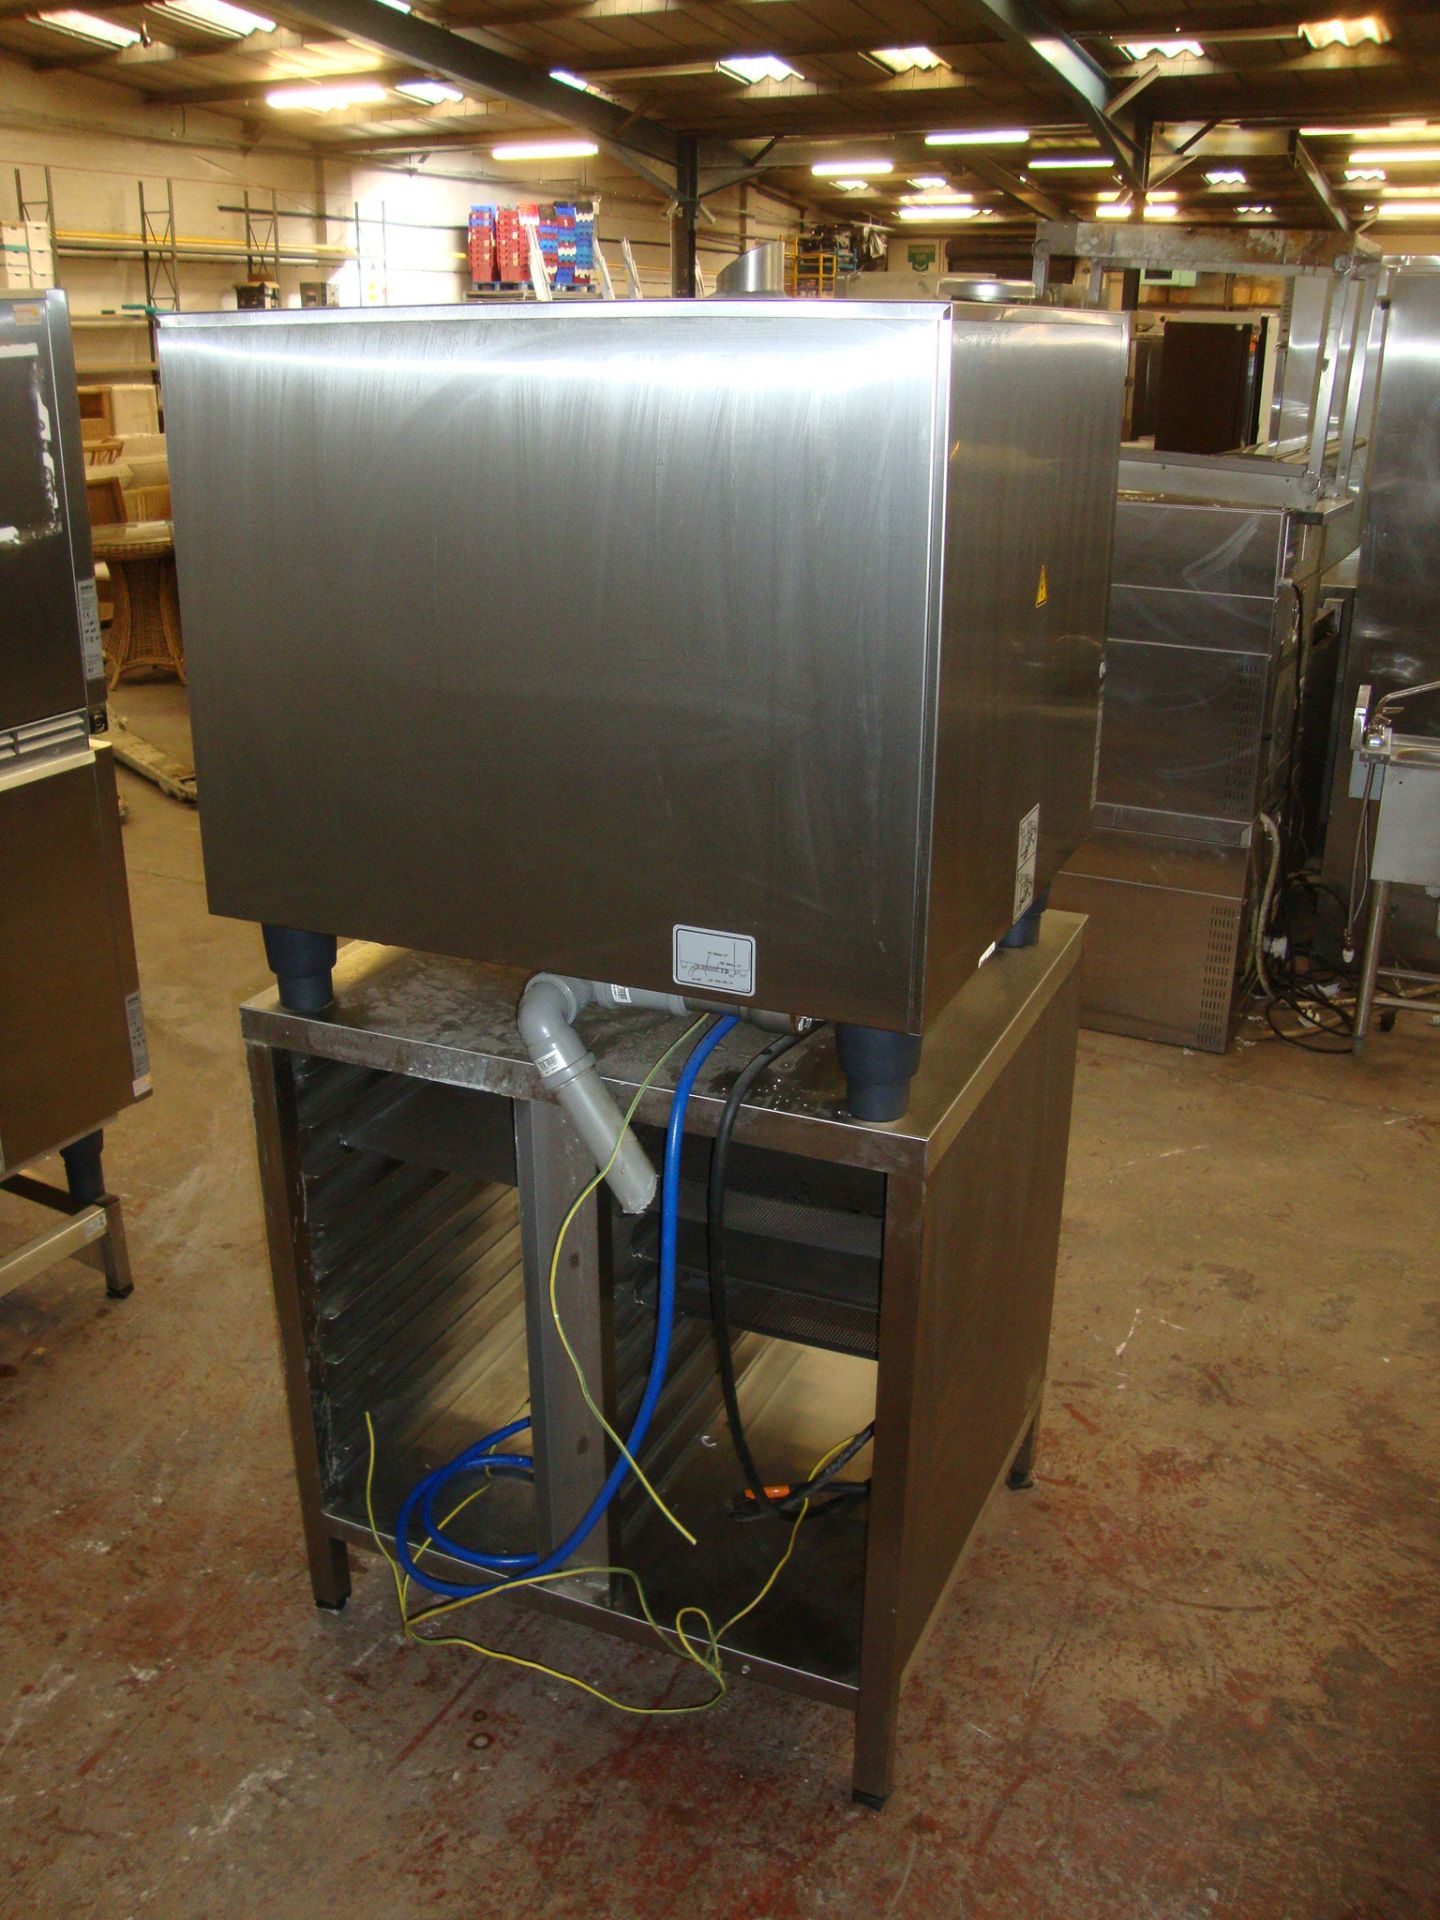 2013 Rational model SCCWE61 stainless steel SelfCookingCenter whiteefficiency stainless steel - Image 17 of 22